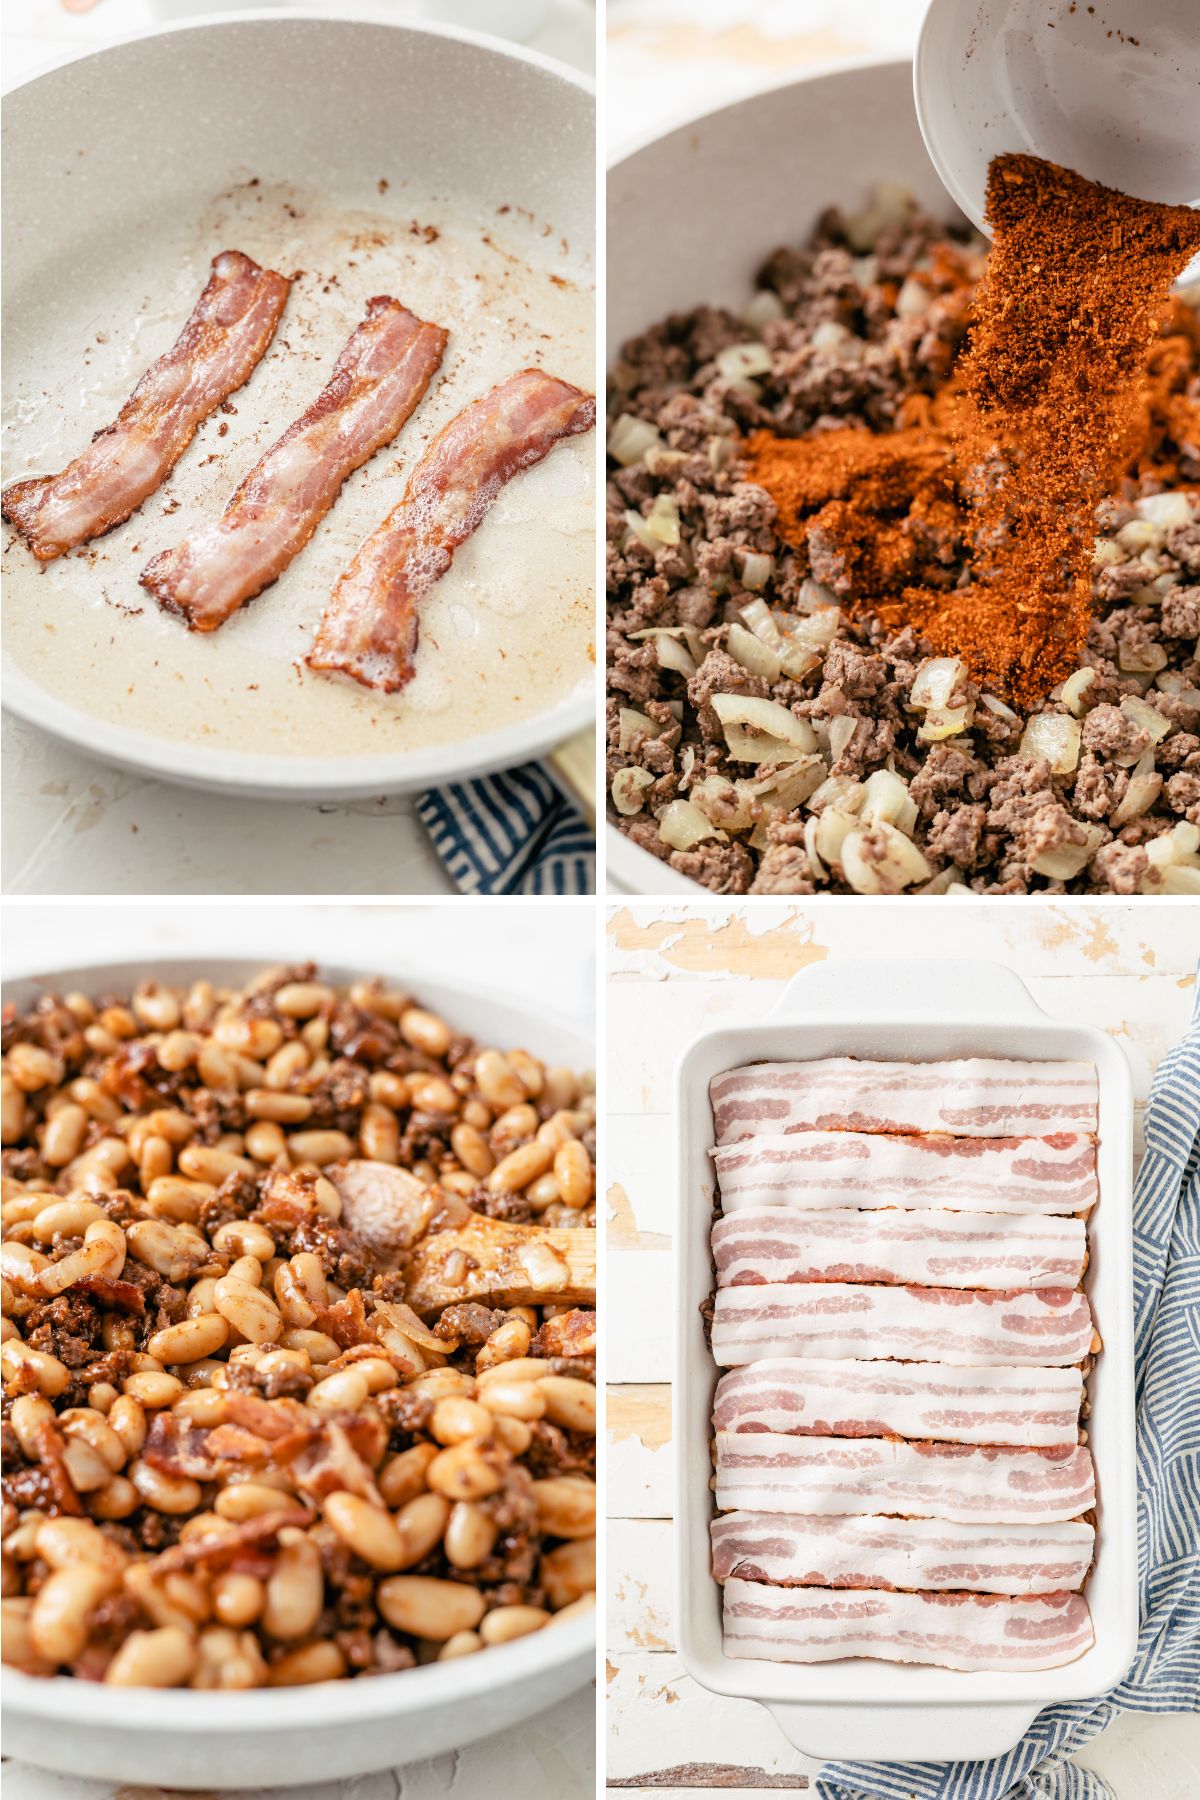 Step-by-step guide to crafting Baked Beans With Ground Beef, showcasing each flavorful stage of the cooking process.